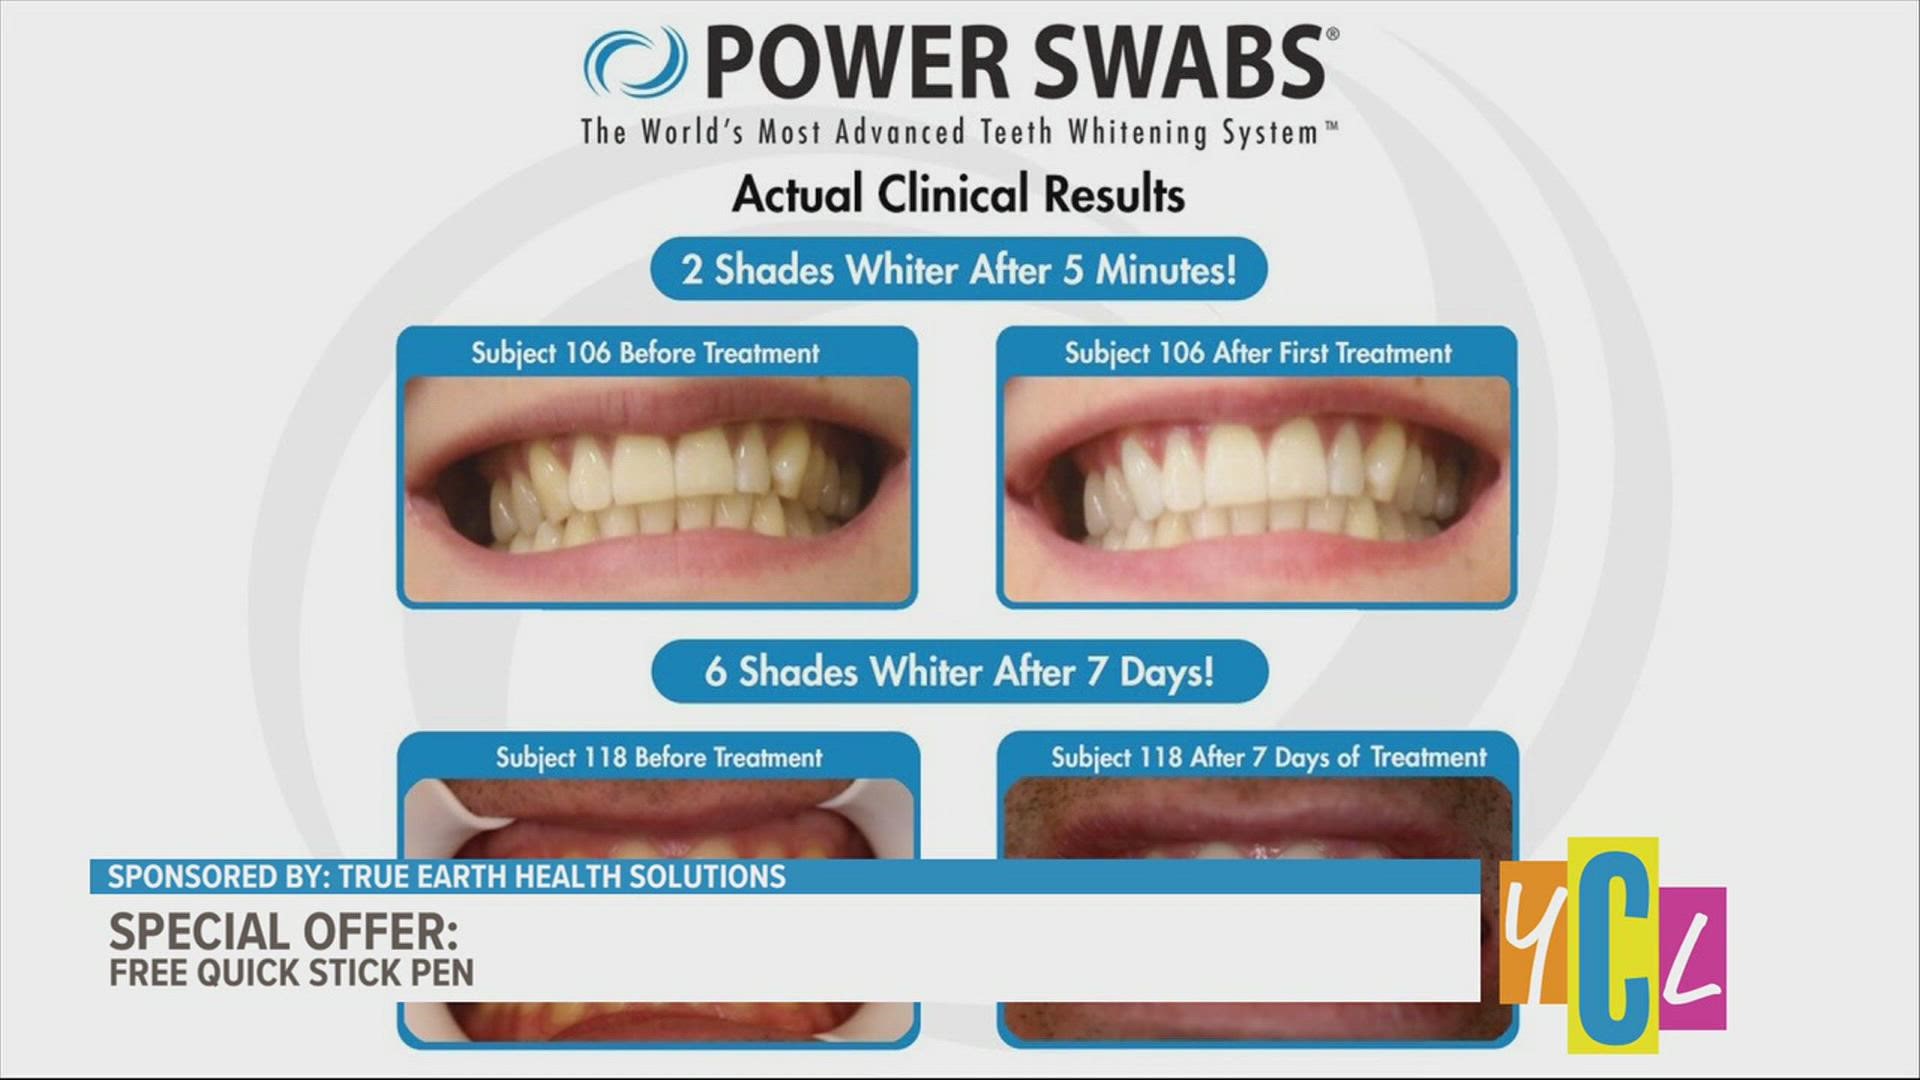 In the 5 minutes it takes to make a pot of coffee you could be whitening your teeth with Power Swabs too. This segment paid for by True Earth Health Solutions.